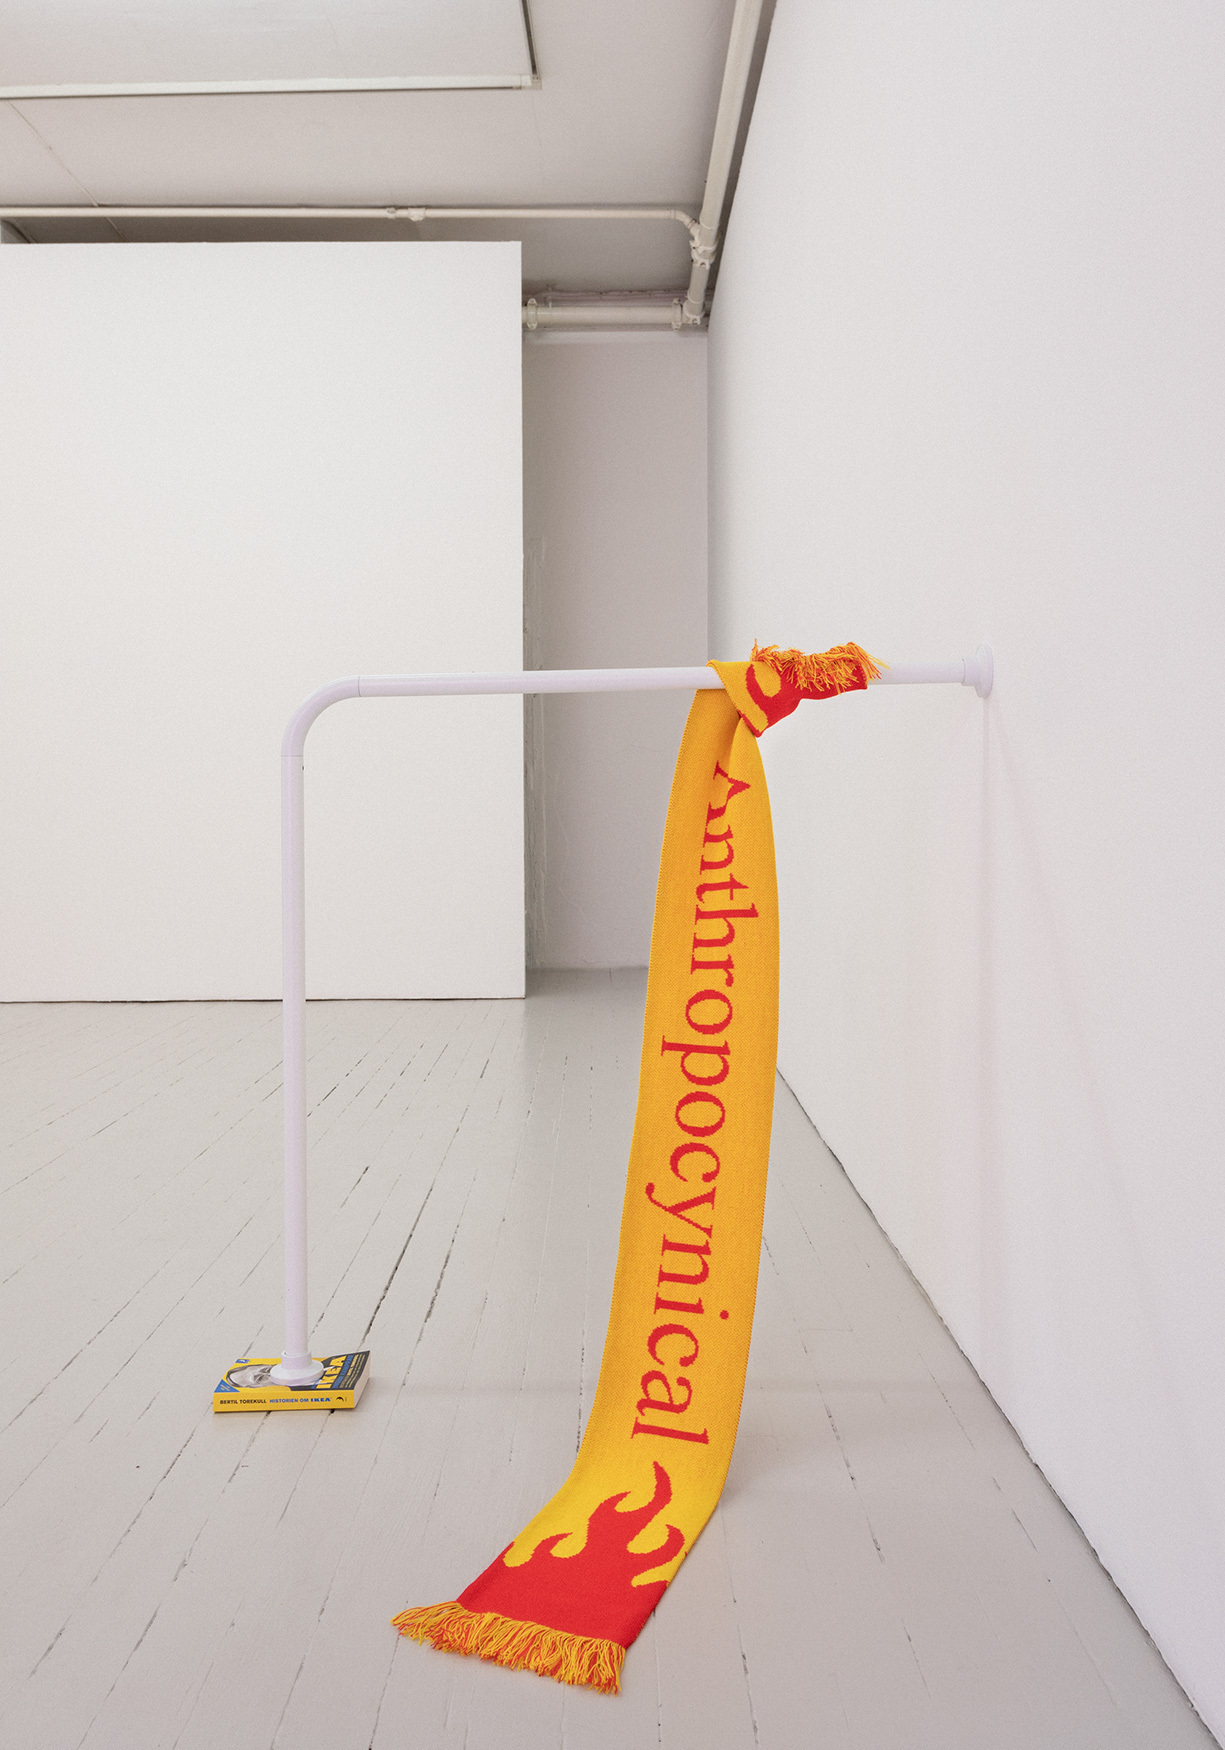 Anton Benois, Anthropocynical, 2020, bathroom pipes, Ingvar Kamprad's biography, synthetic footbal scarf, dimensions variable